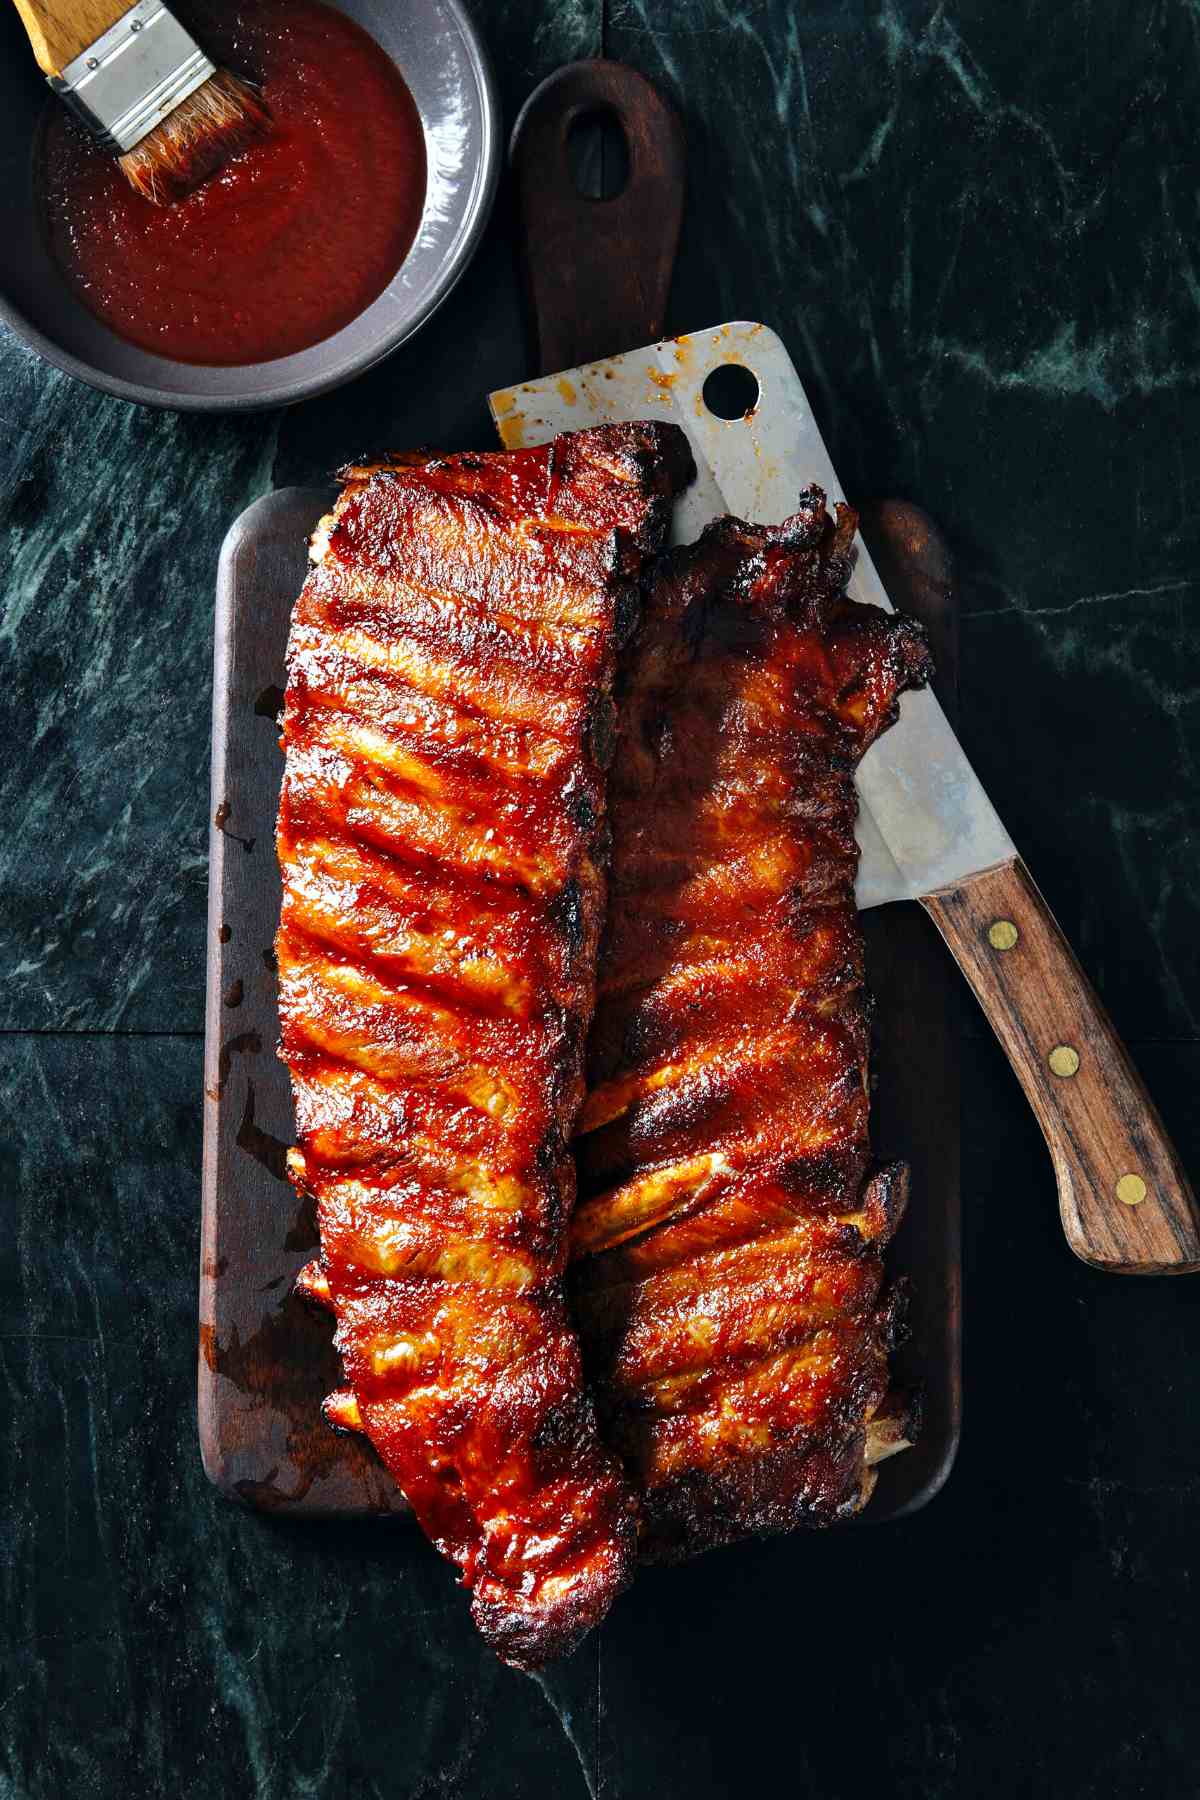 From country-style to baby back, there’s no denying that ribs are one of the most delicious ways to enjoy pork. The secret to restaurant-quality ribs is simply cooking your pork ribs to the right internal temperature. This ensures your ribs are moist, tender and full of flavor. After reading this post, you’ll know when your ribs are done for a perfect meal every time!